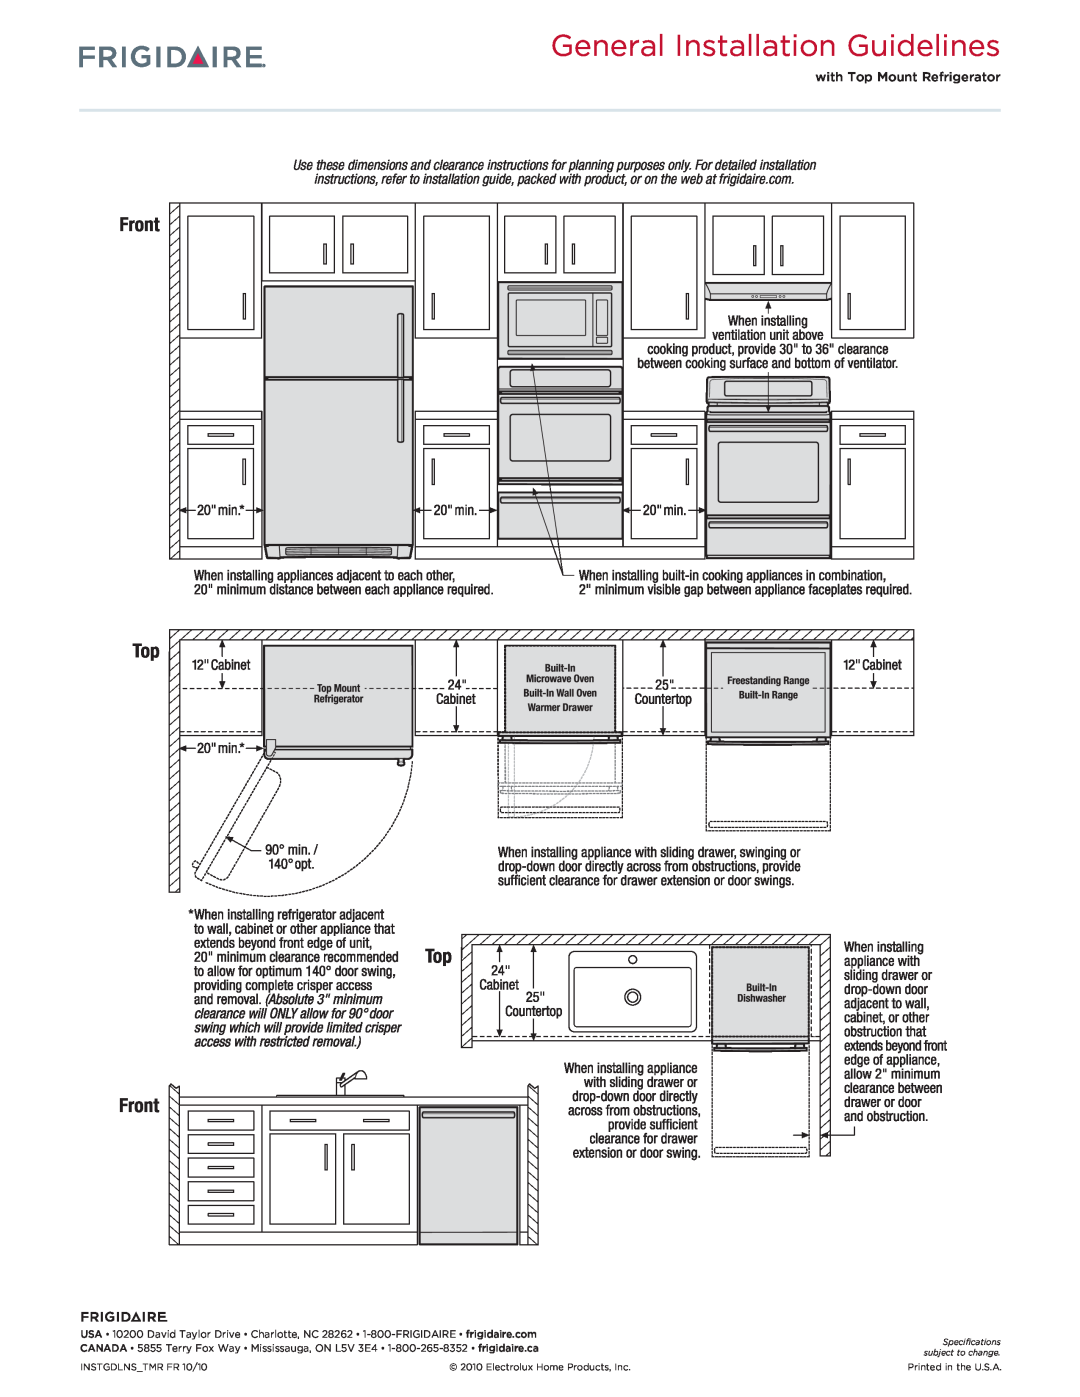 Frigidaire FFGF3017L General Installation Guidelines, Top Front, with Top Mount Refrigerator, INSTGDLNS TMR FR 10/10 